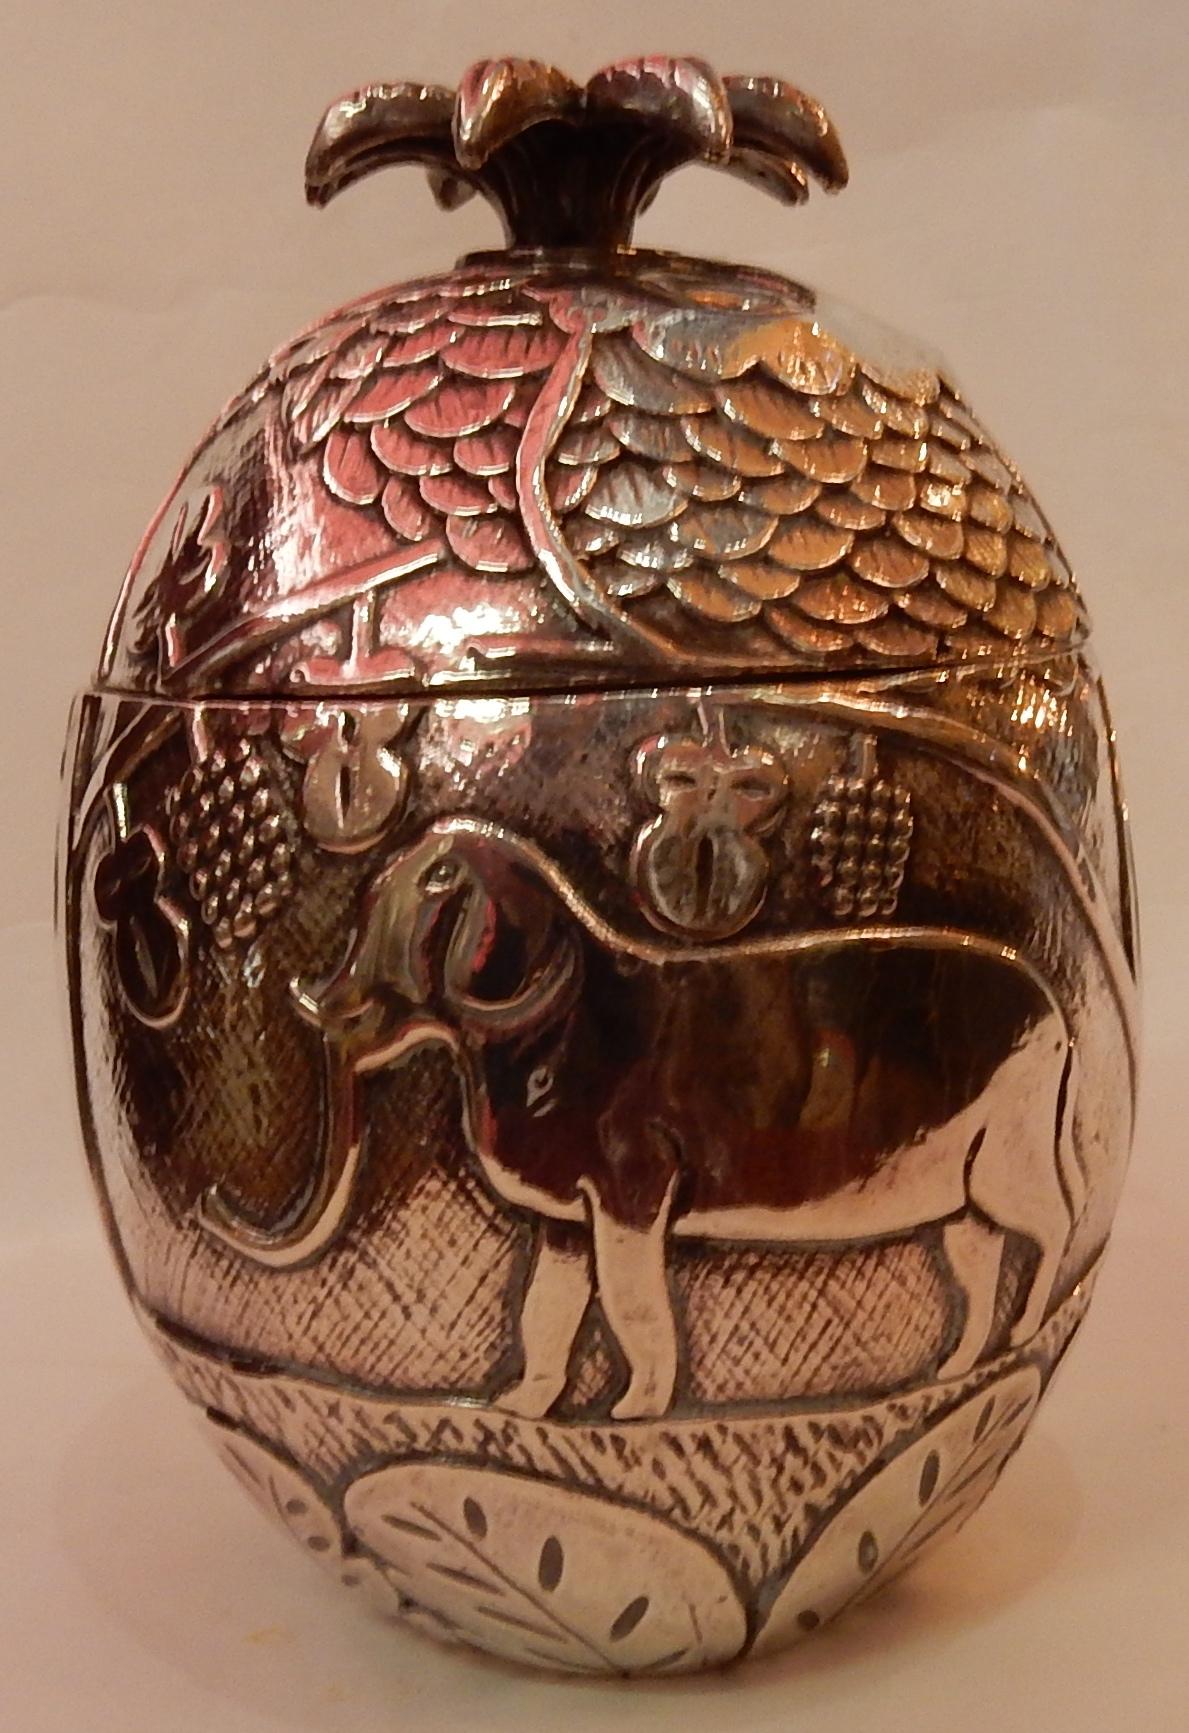 Pineapple-shaped ice bucket in the style of Marc Chagall with elephant, camel and caribou decoration, silver-plated metal. Good condition, circa 1950-1970.